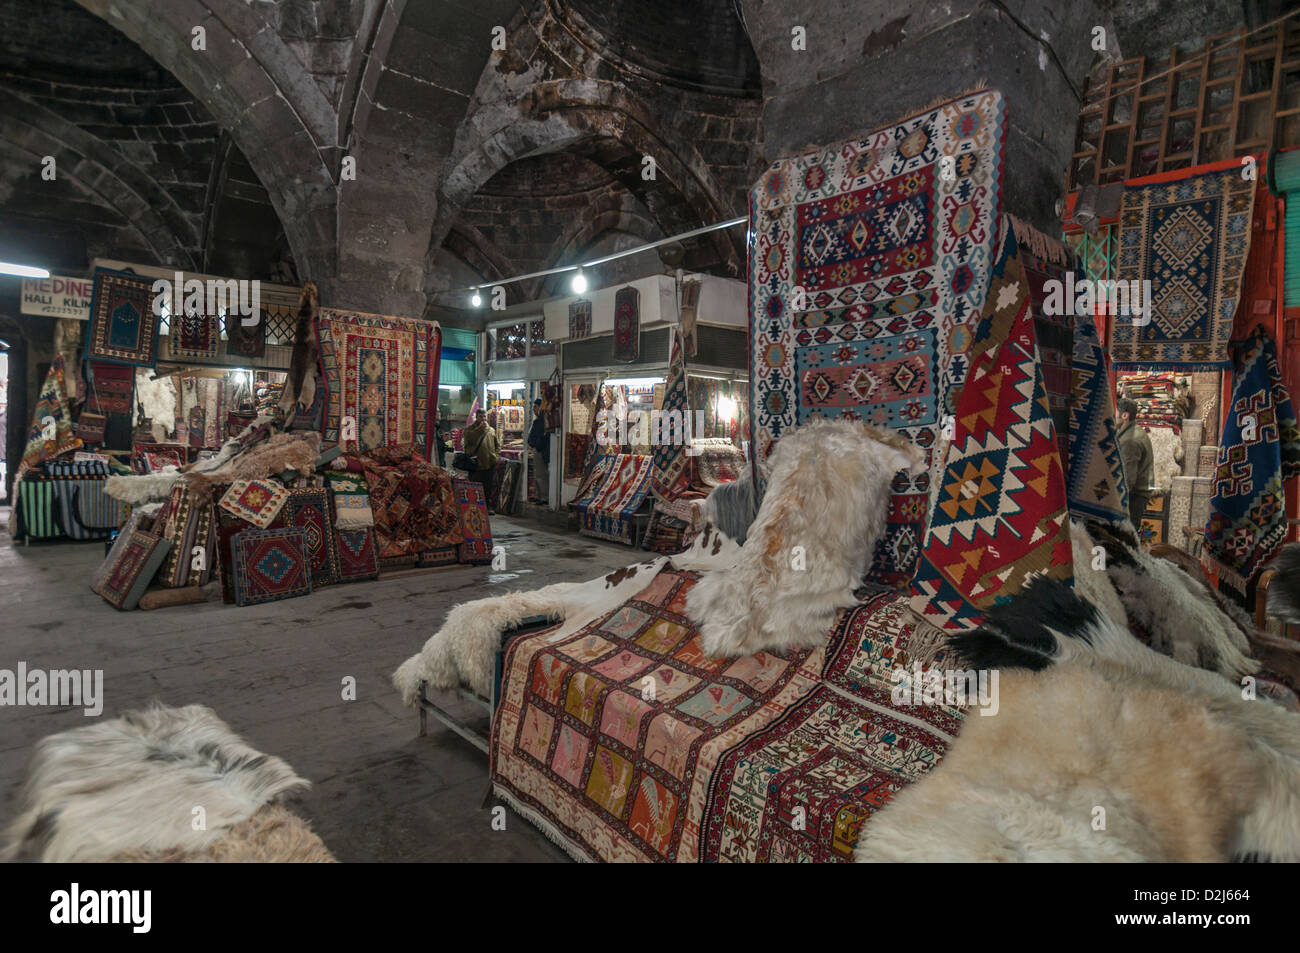 The Bedesten of Kayseri, the old covered market of the city.Central Anatolia of Turkey Stock Photo